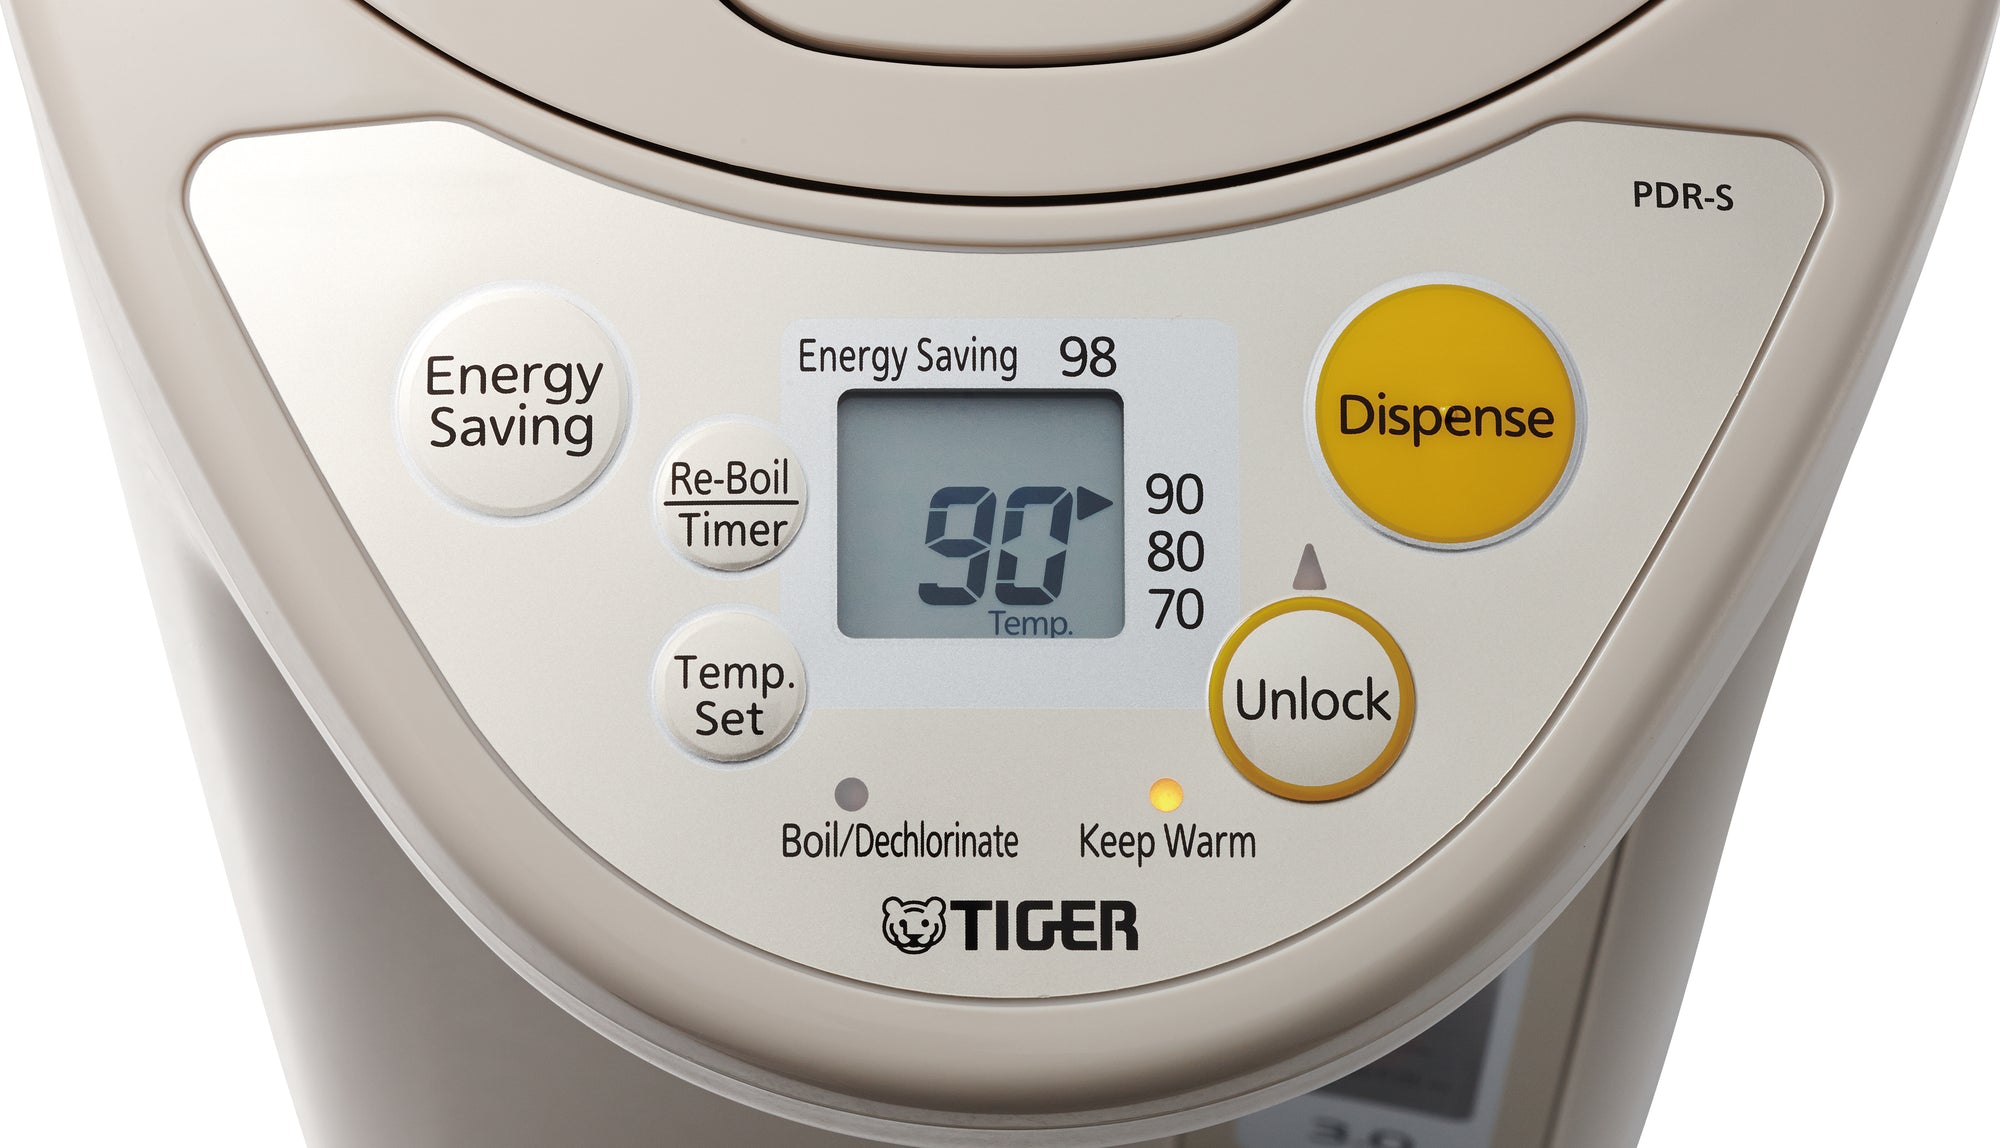 Tiger Electric Water Heater PDR-S